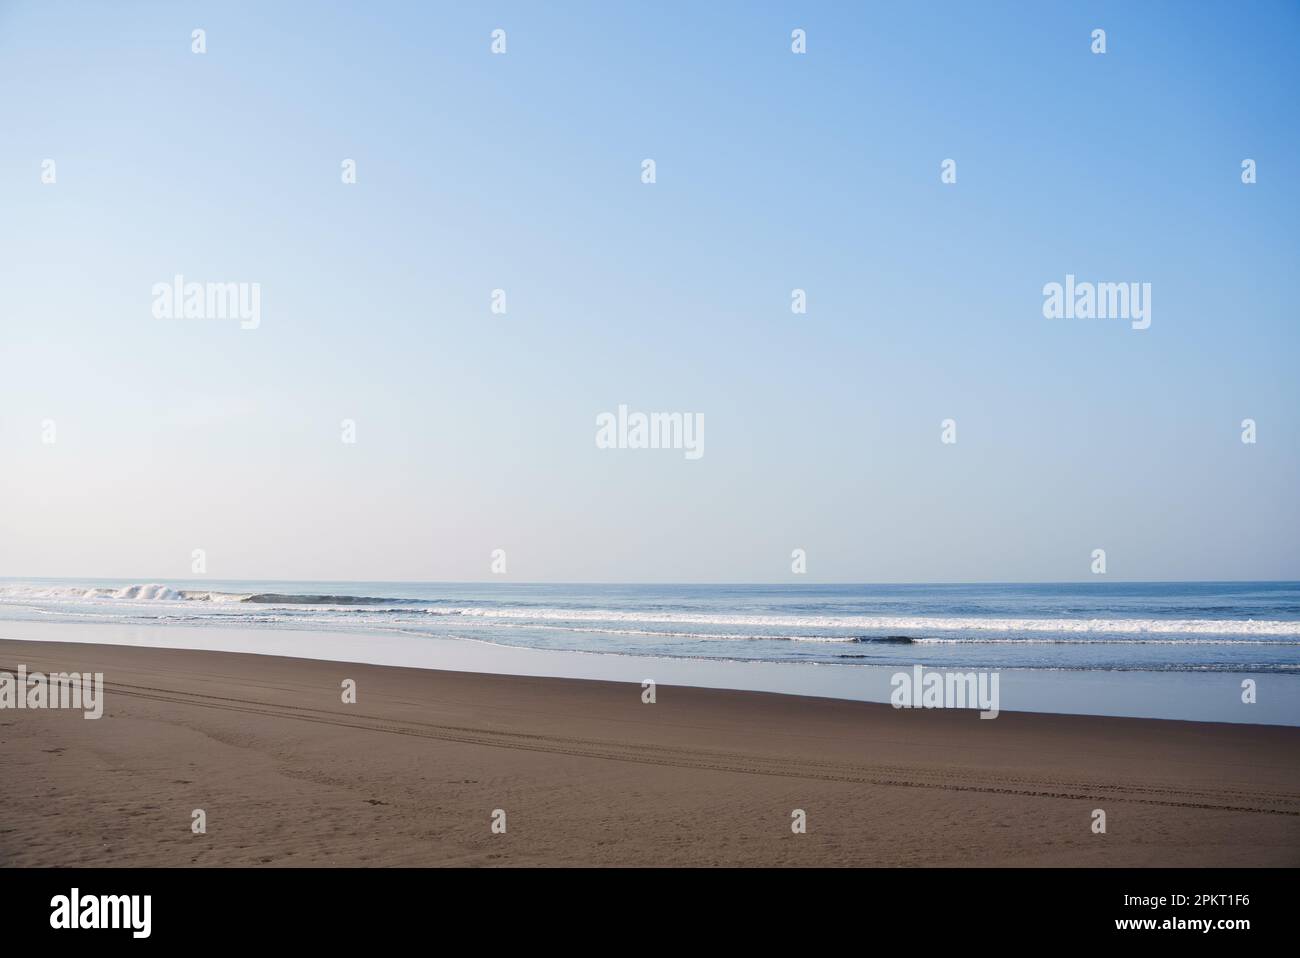 Las Lisas, Guatemala: Early morning view of the beach. The image shows ...